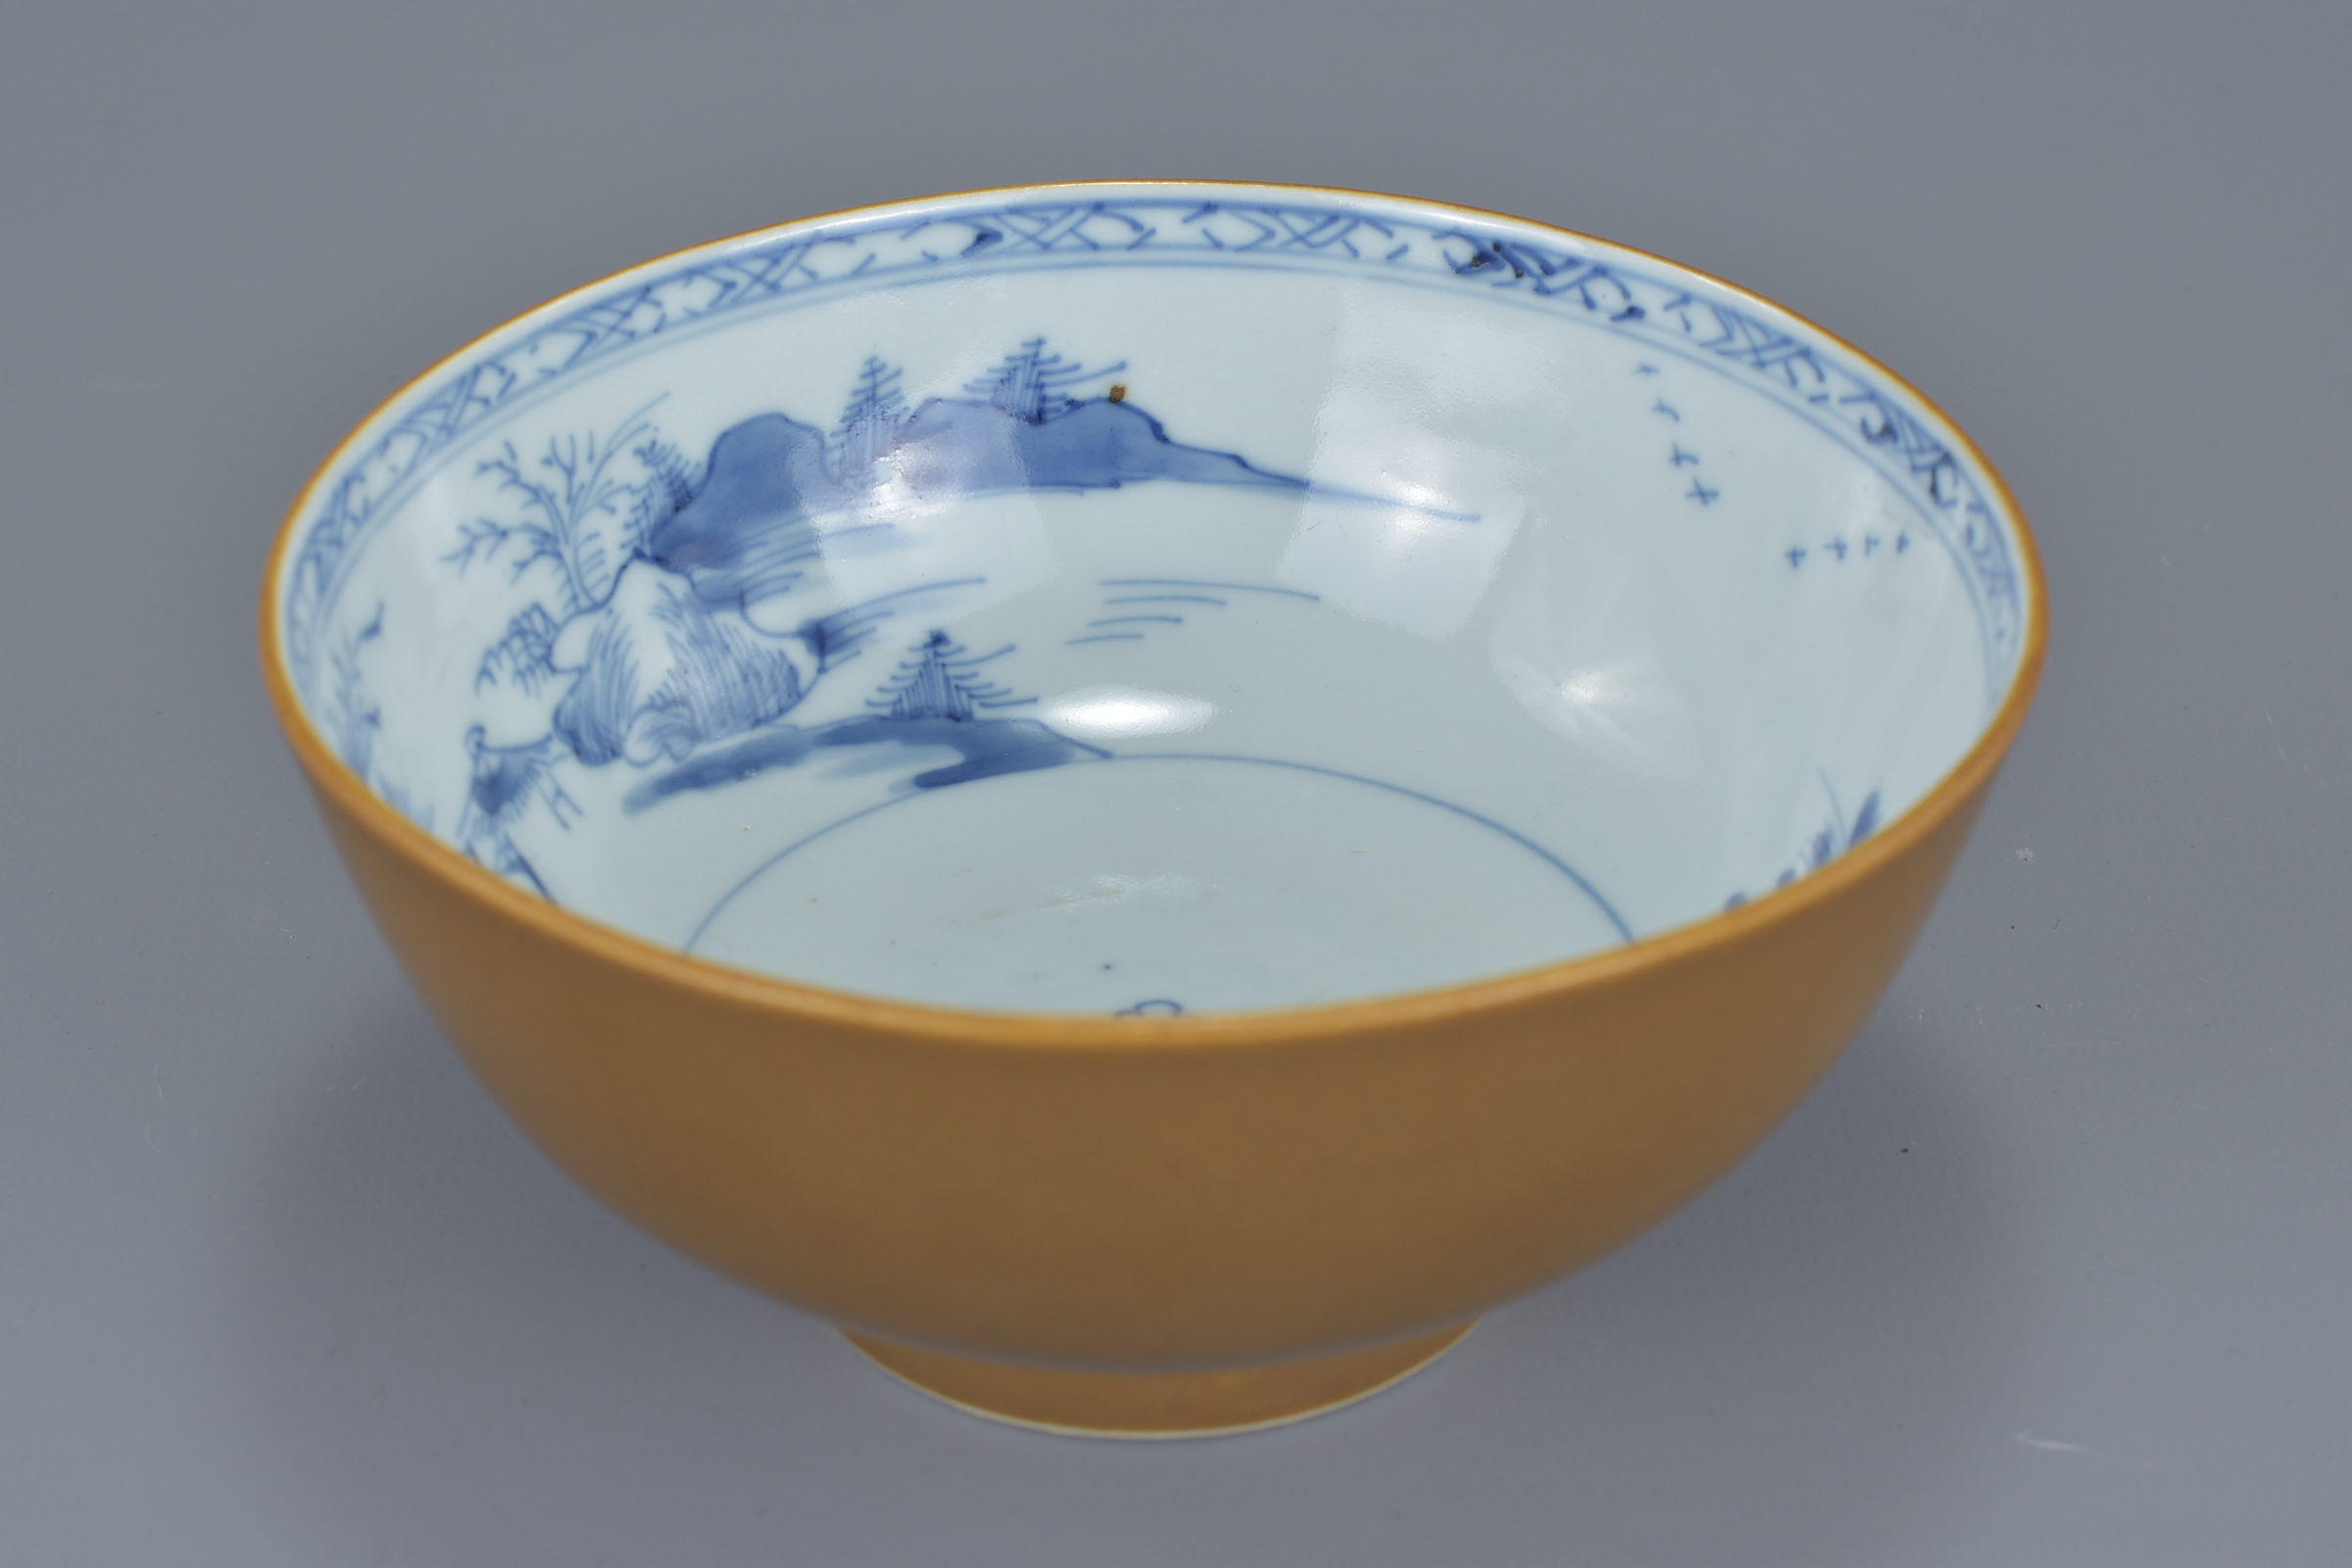 A Chinese 18th century tea-dust brown glazed export porcelain bowl with underglaze blue interior dep